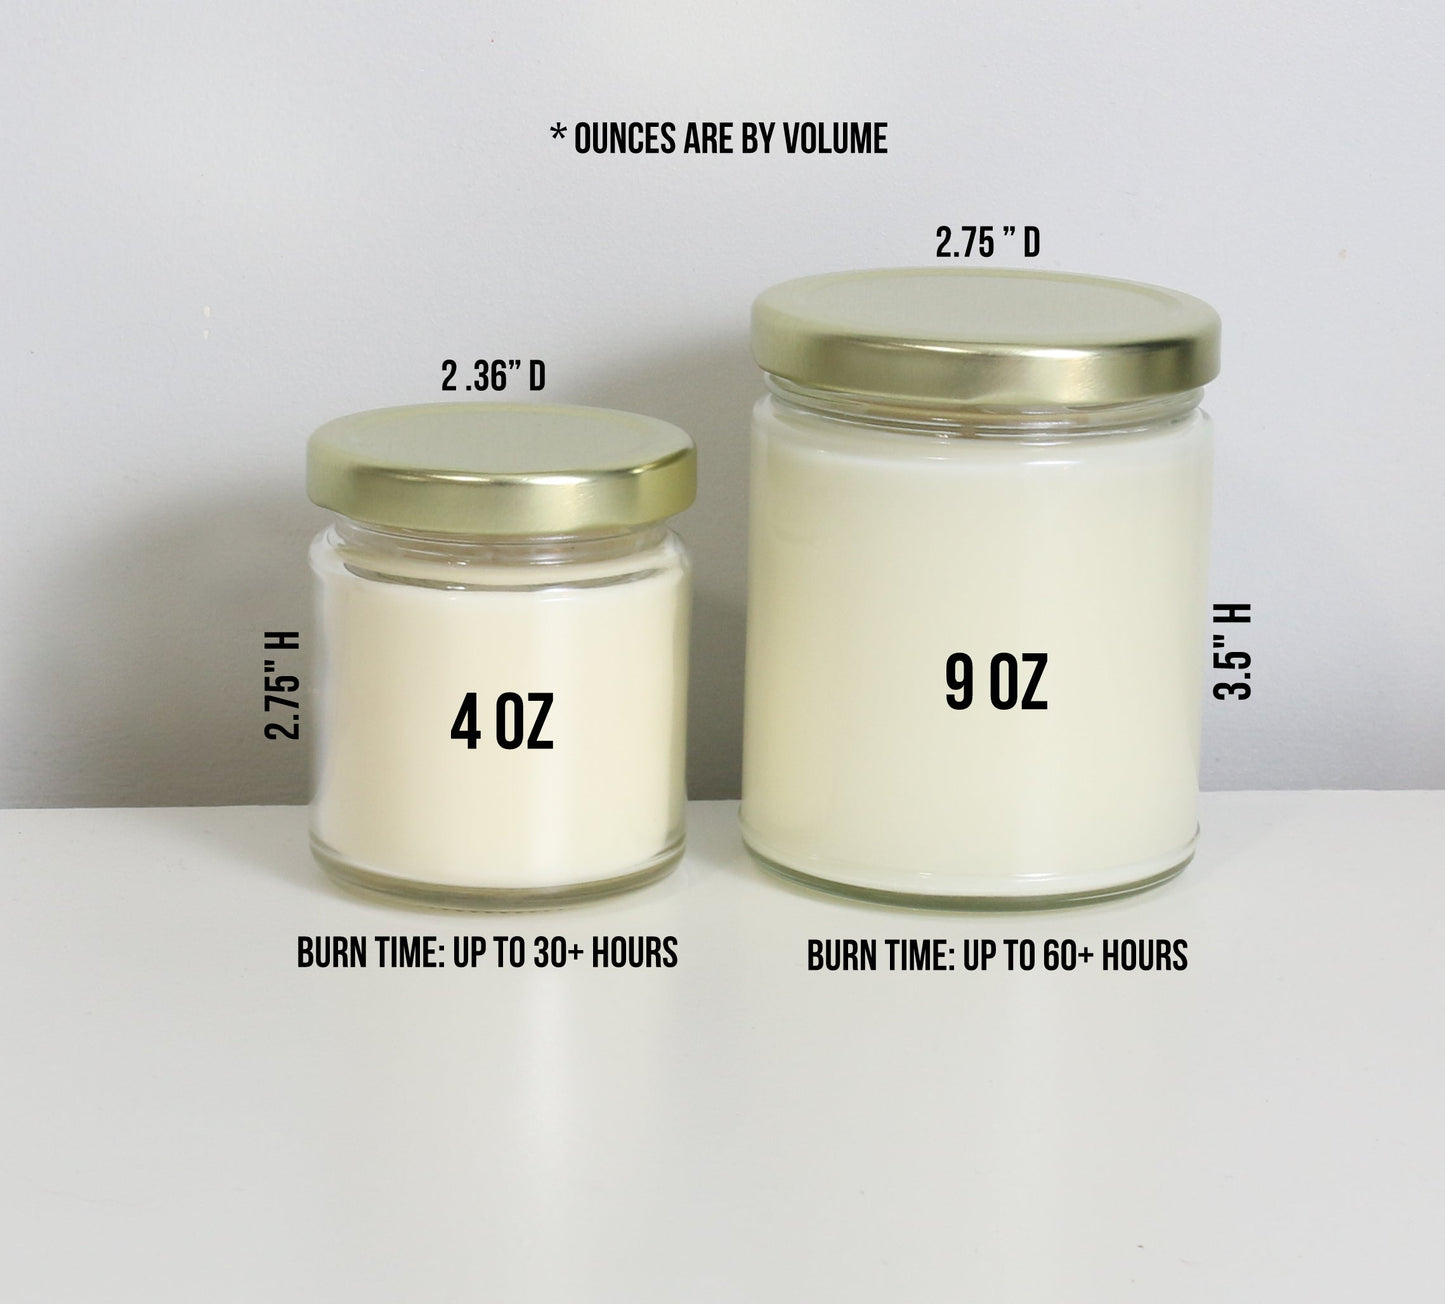 Age Is Only A Number Soy Candle - Choose Your Scent - Birthday Gift